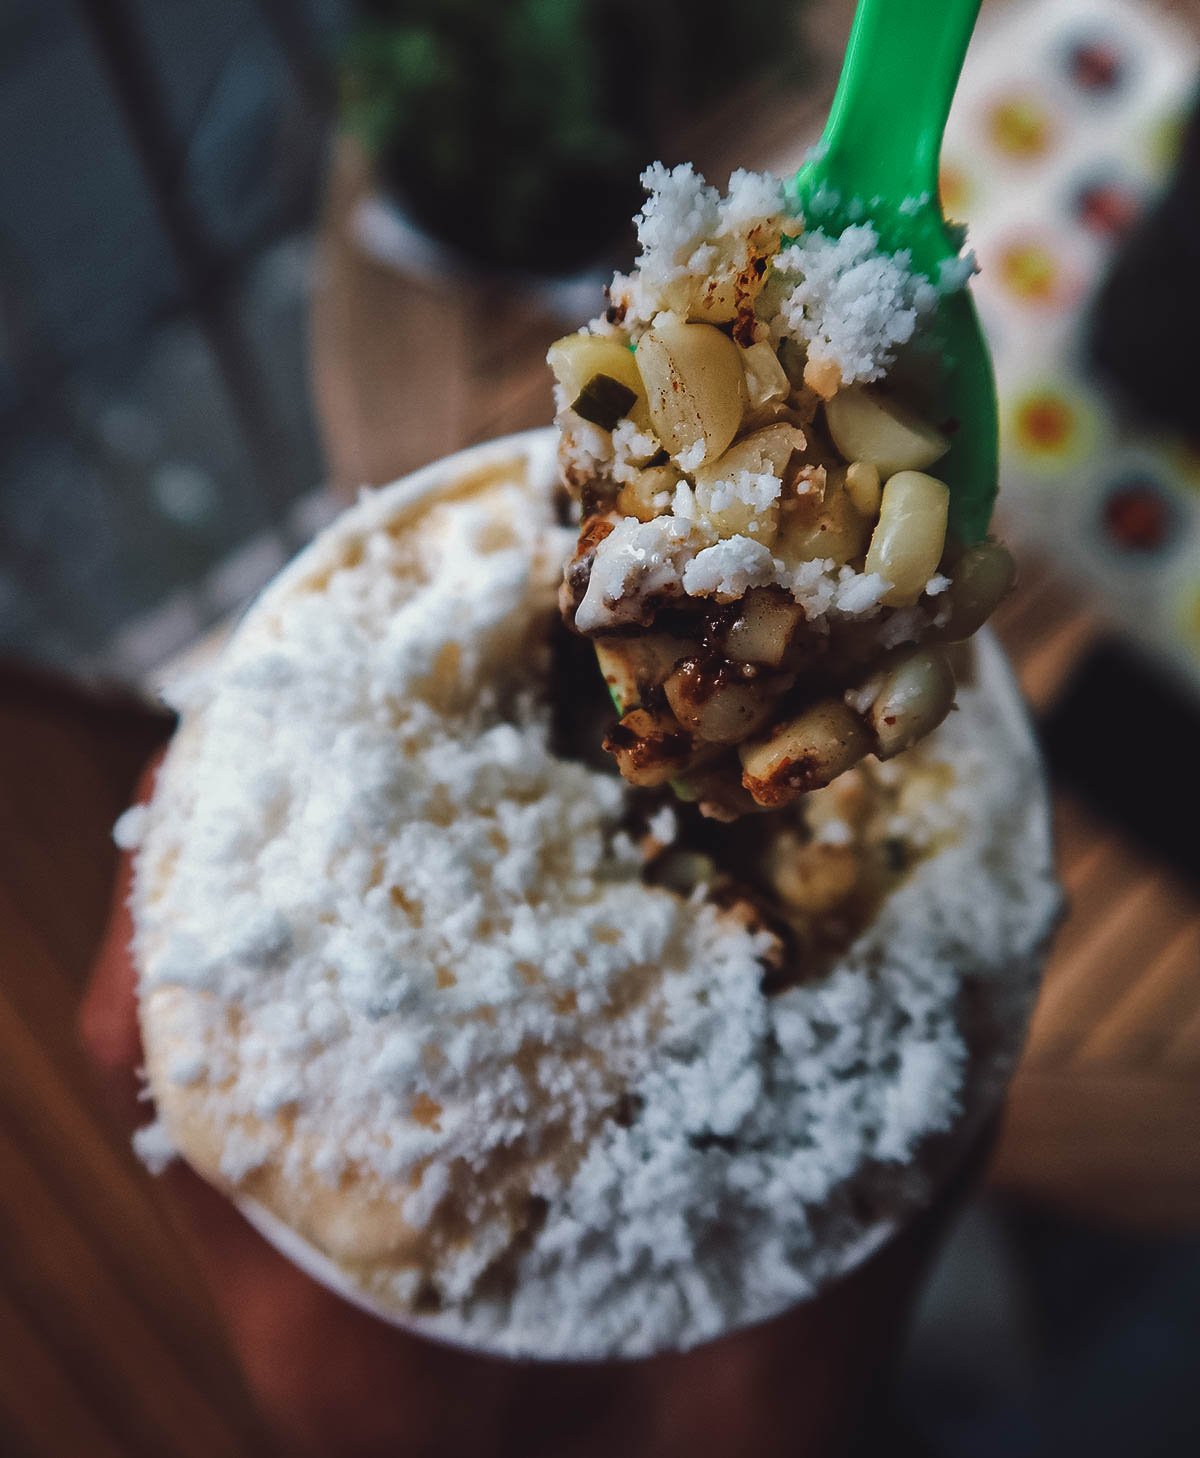 Cup of esquites in Mexico